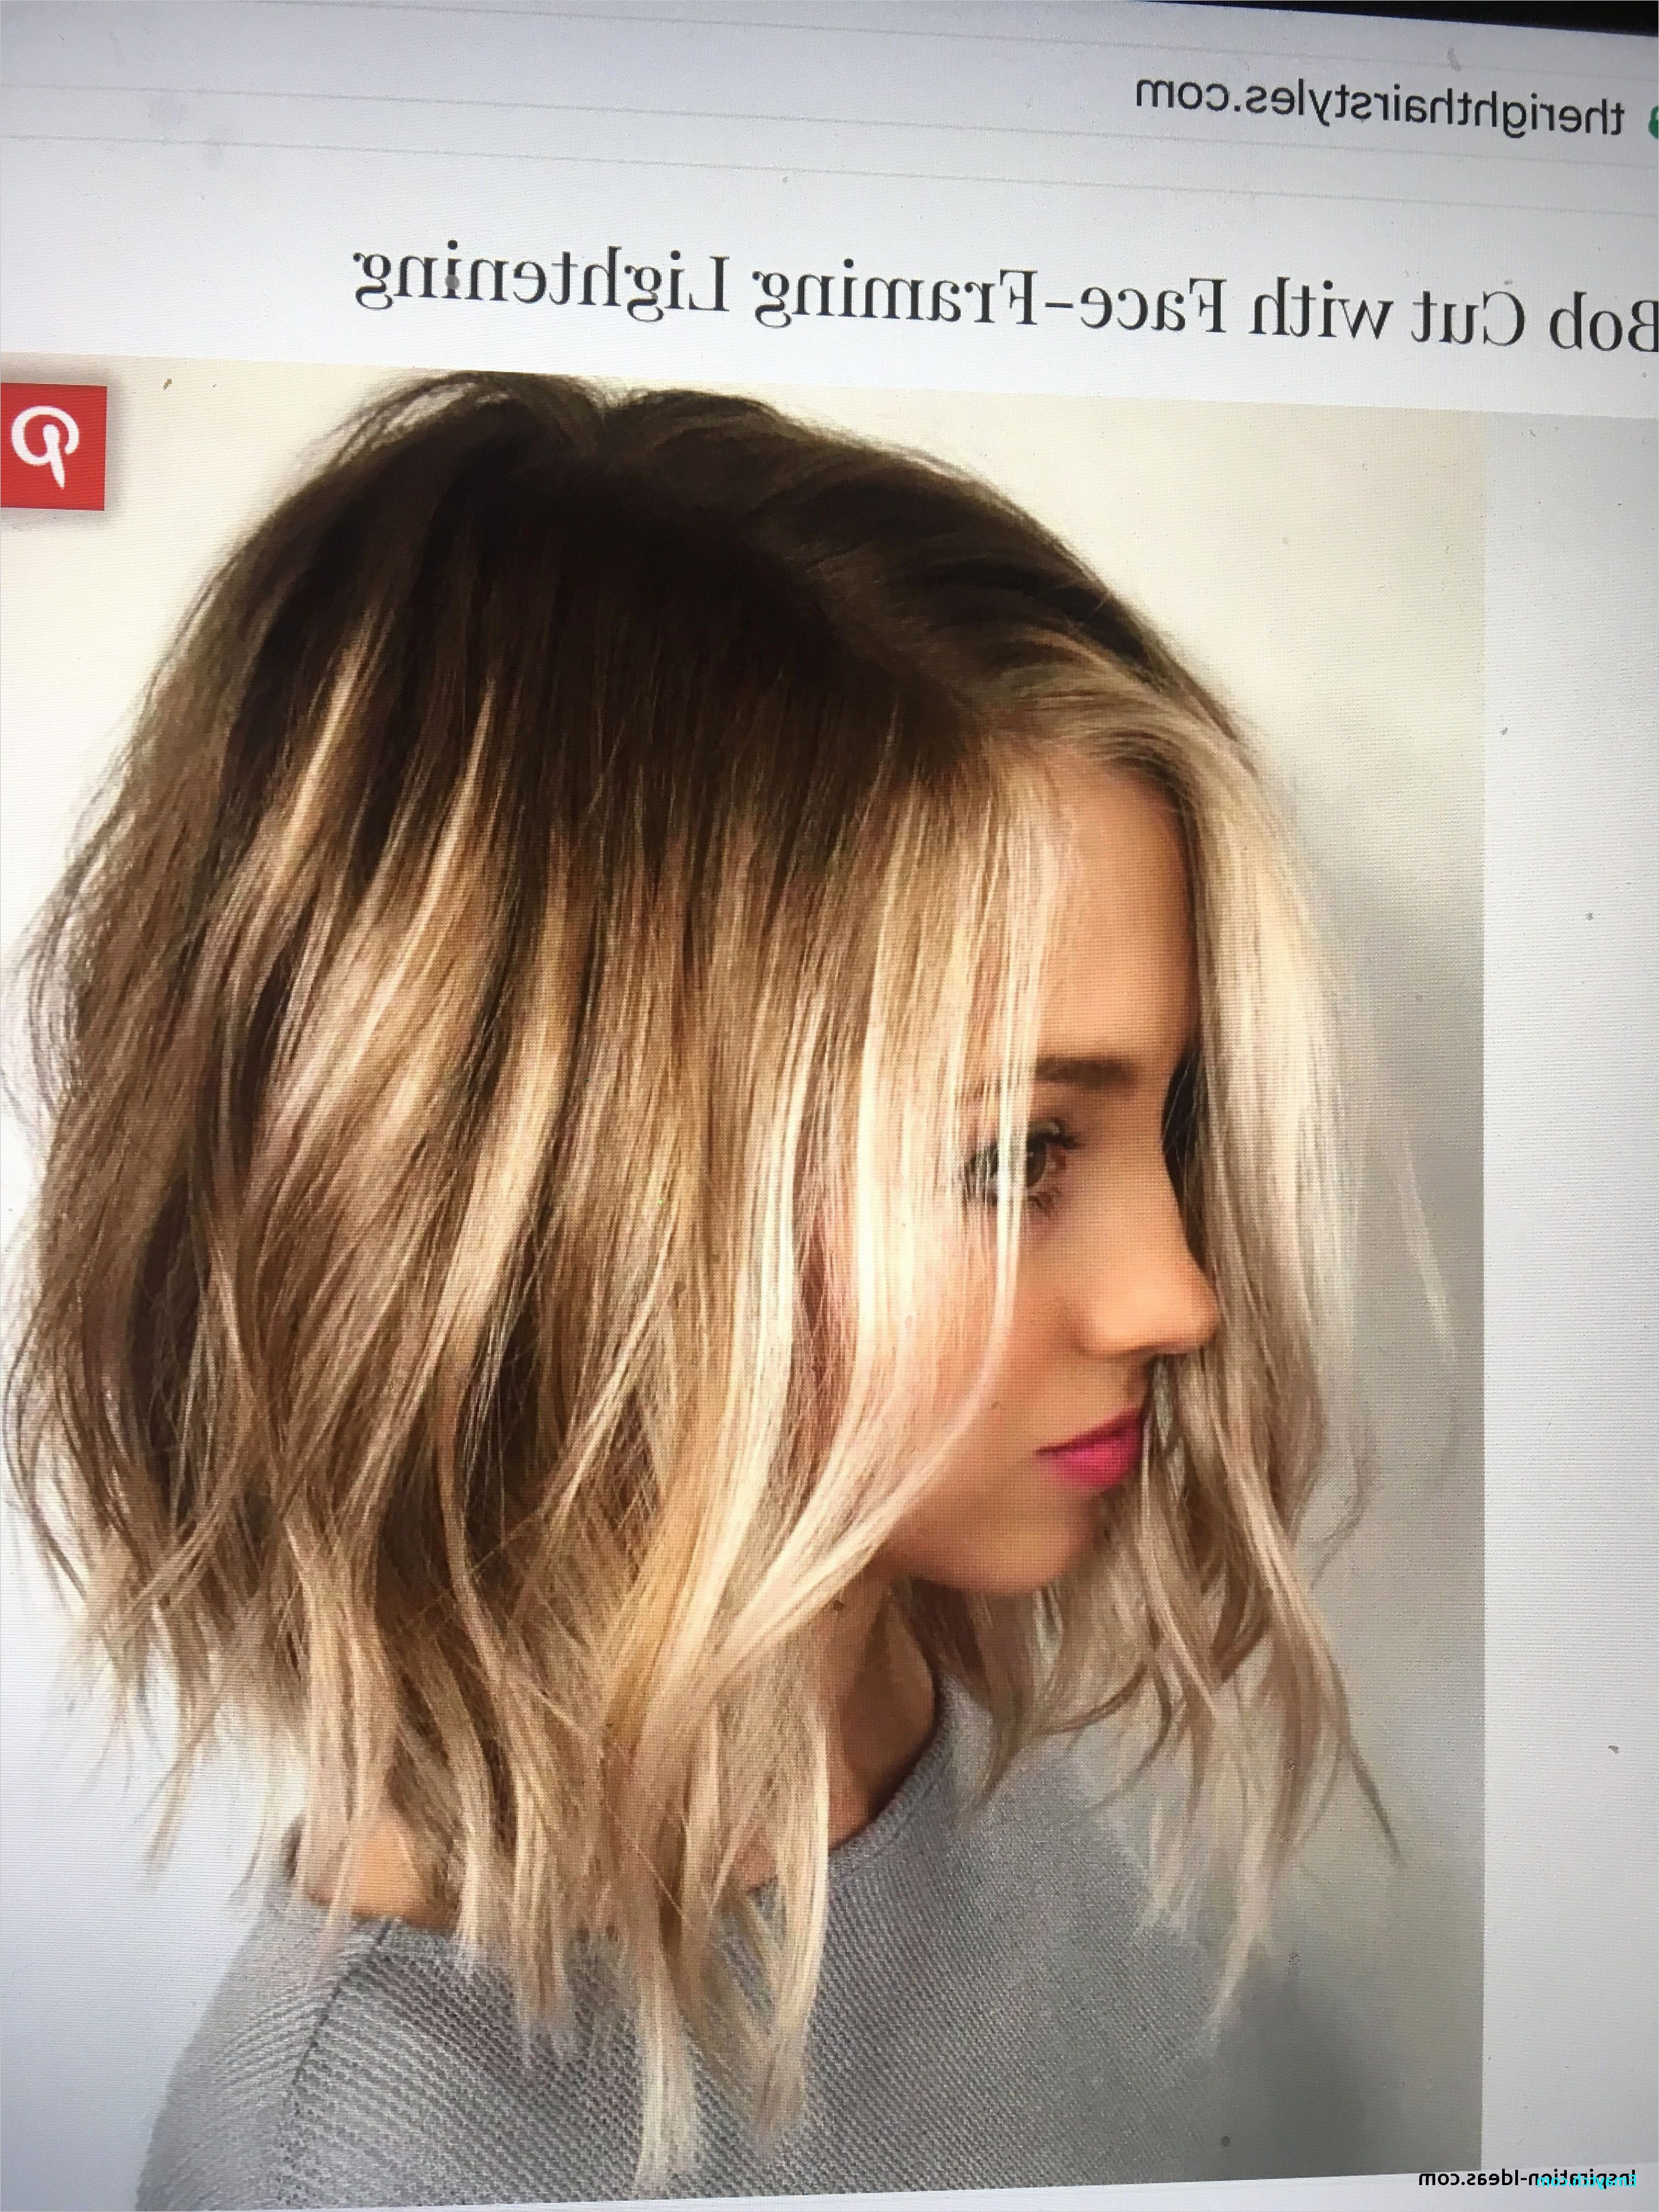 Short Shoulder Length Hairstyles Luxury 10 Short Hairstyles For Fine Regarding Short Hairstyles Shoulder Length (View 5 of 25)